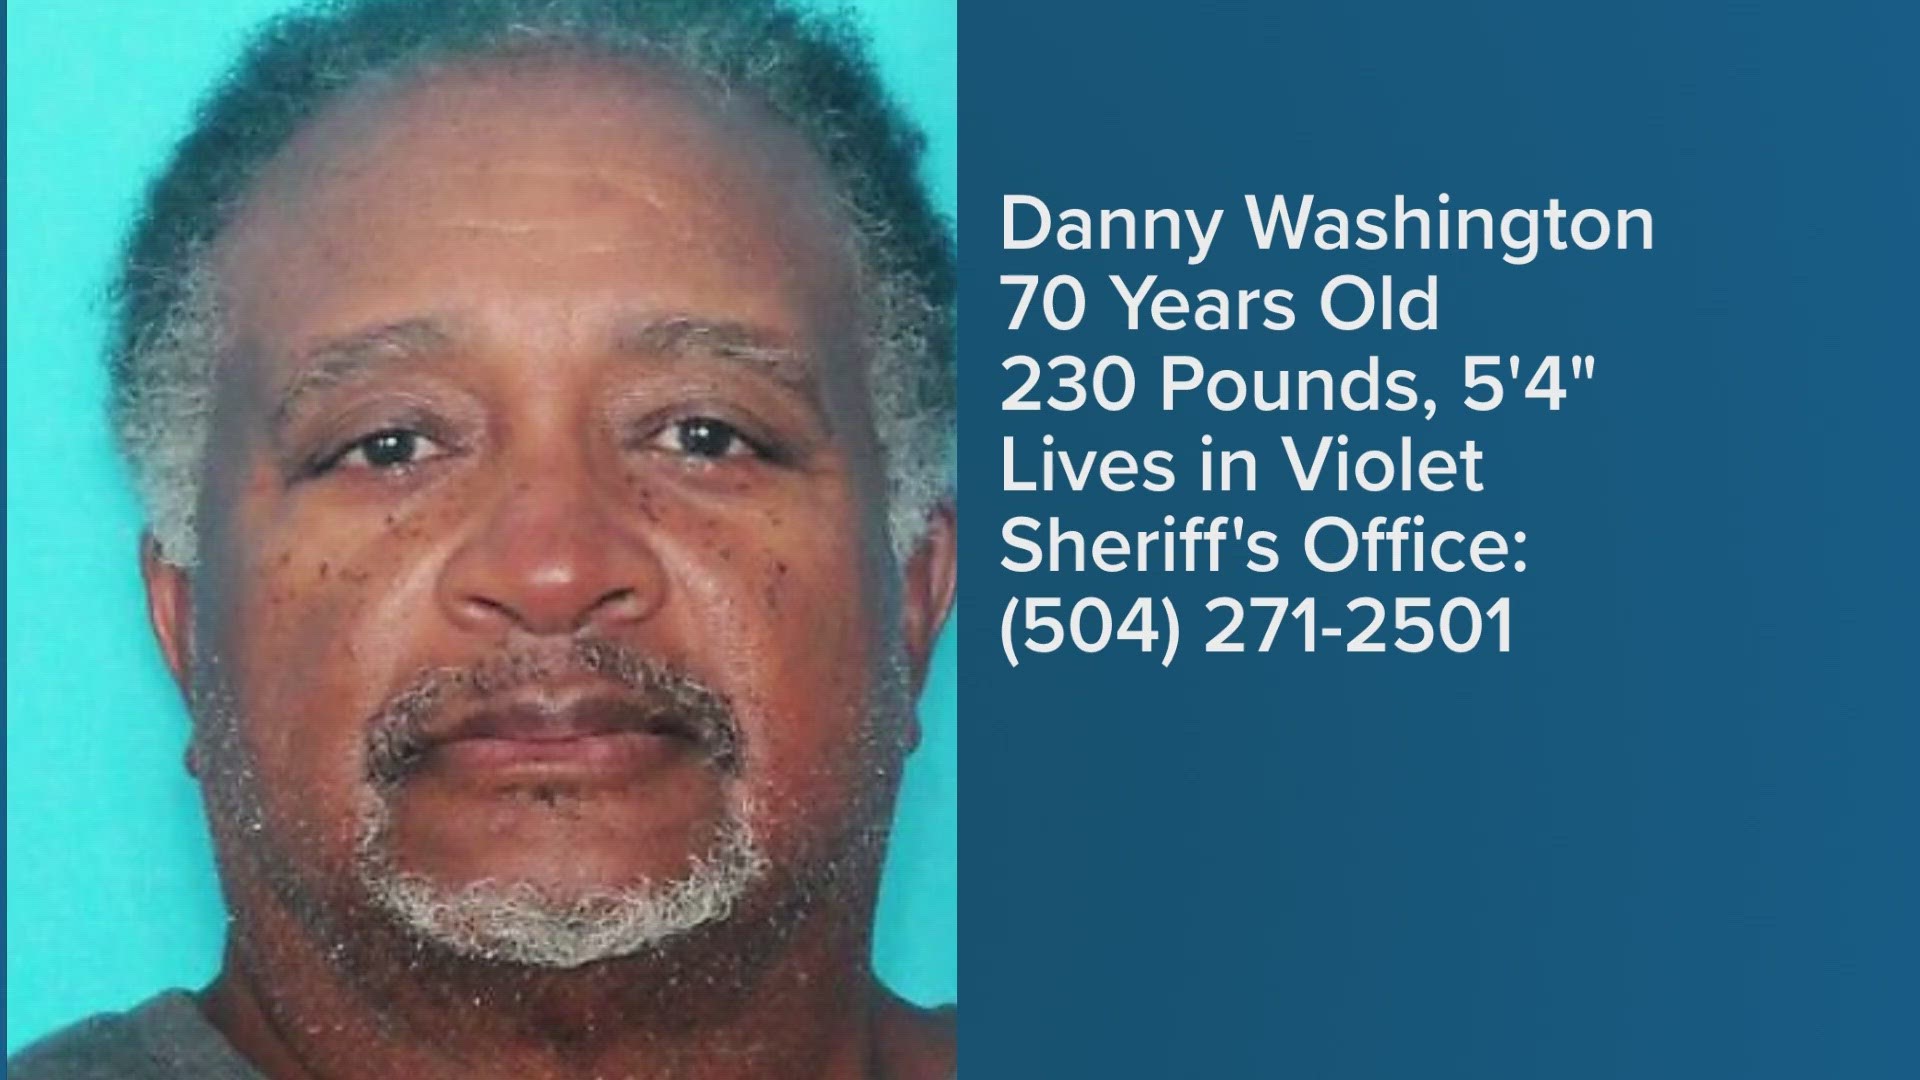 The St. Bernard Parish Sheriff’s Office is looking for 70-year-old Danny Washington from Violet, La. The sheriff’s office does suspect there is foul play.